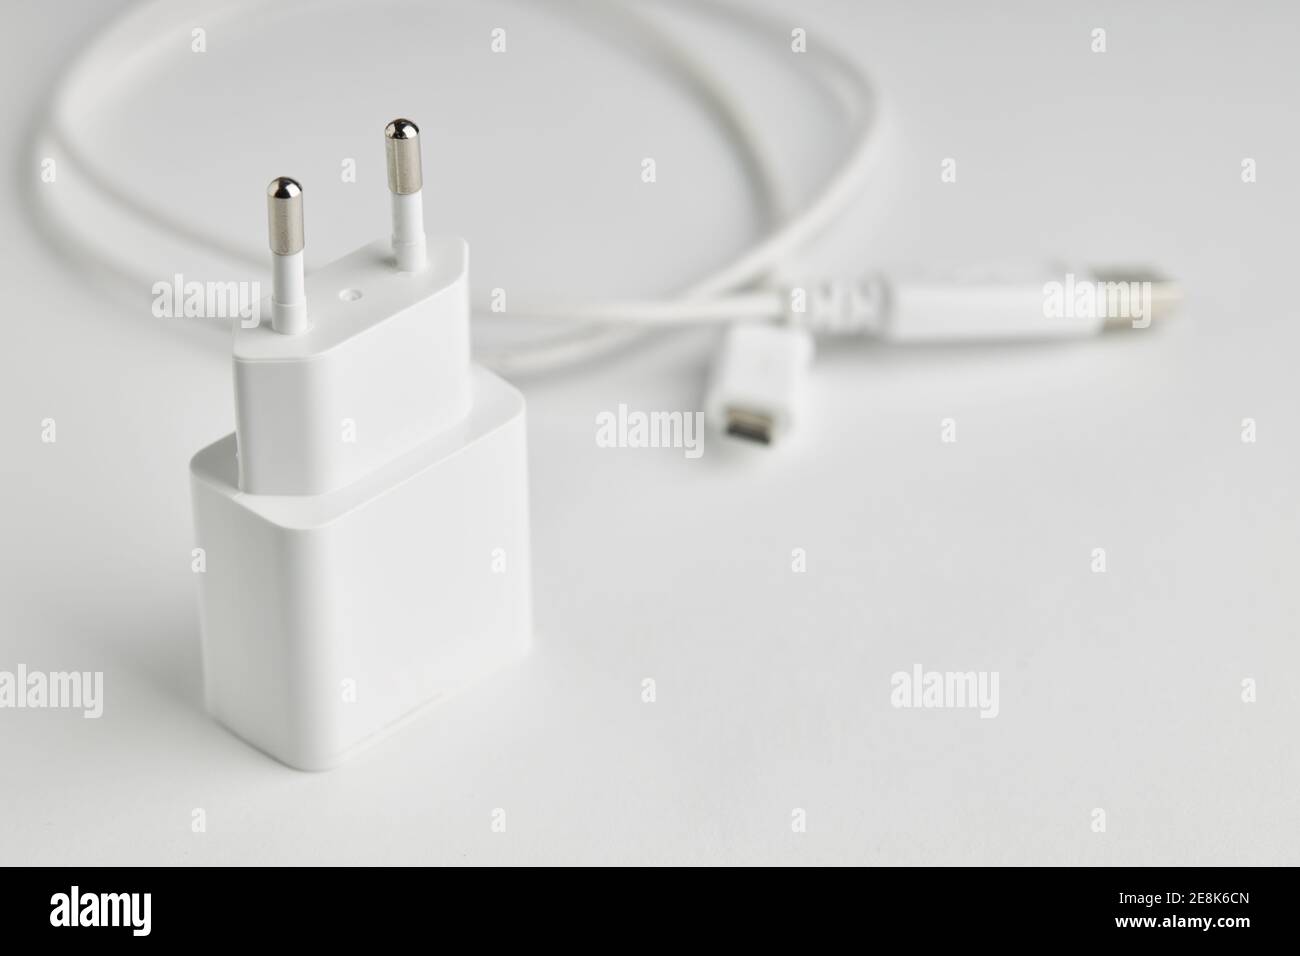 white usb charge or power adapter with usb wire at background. charging portable information devices Stock Photo